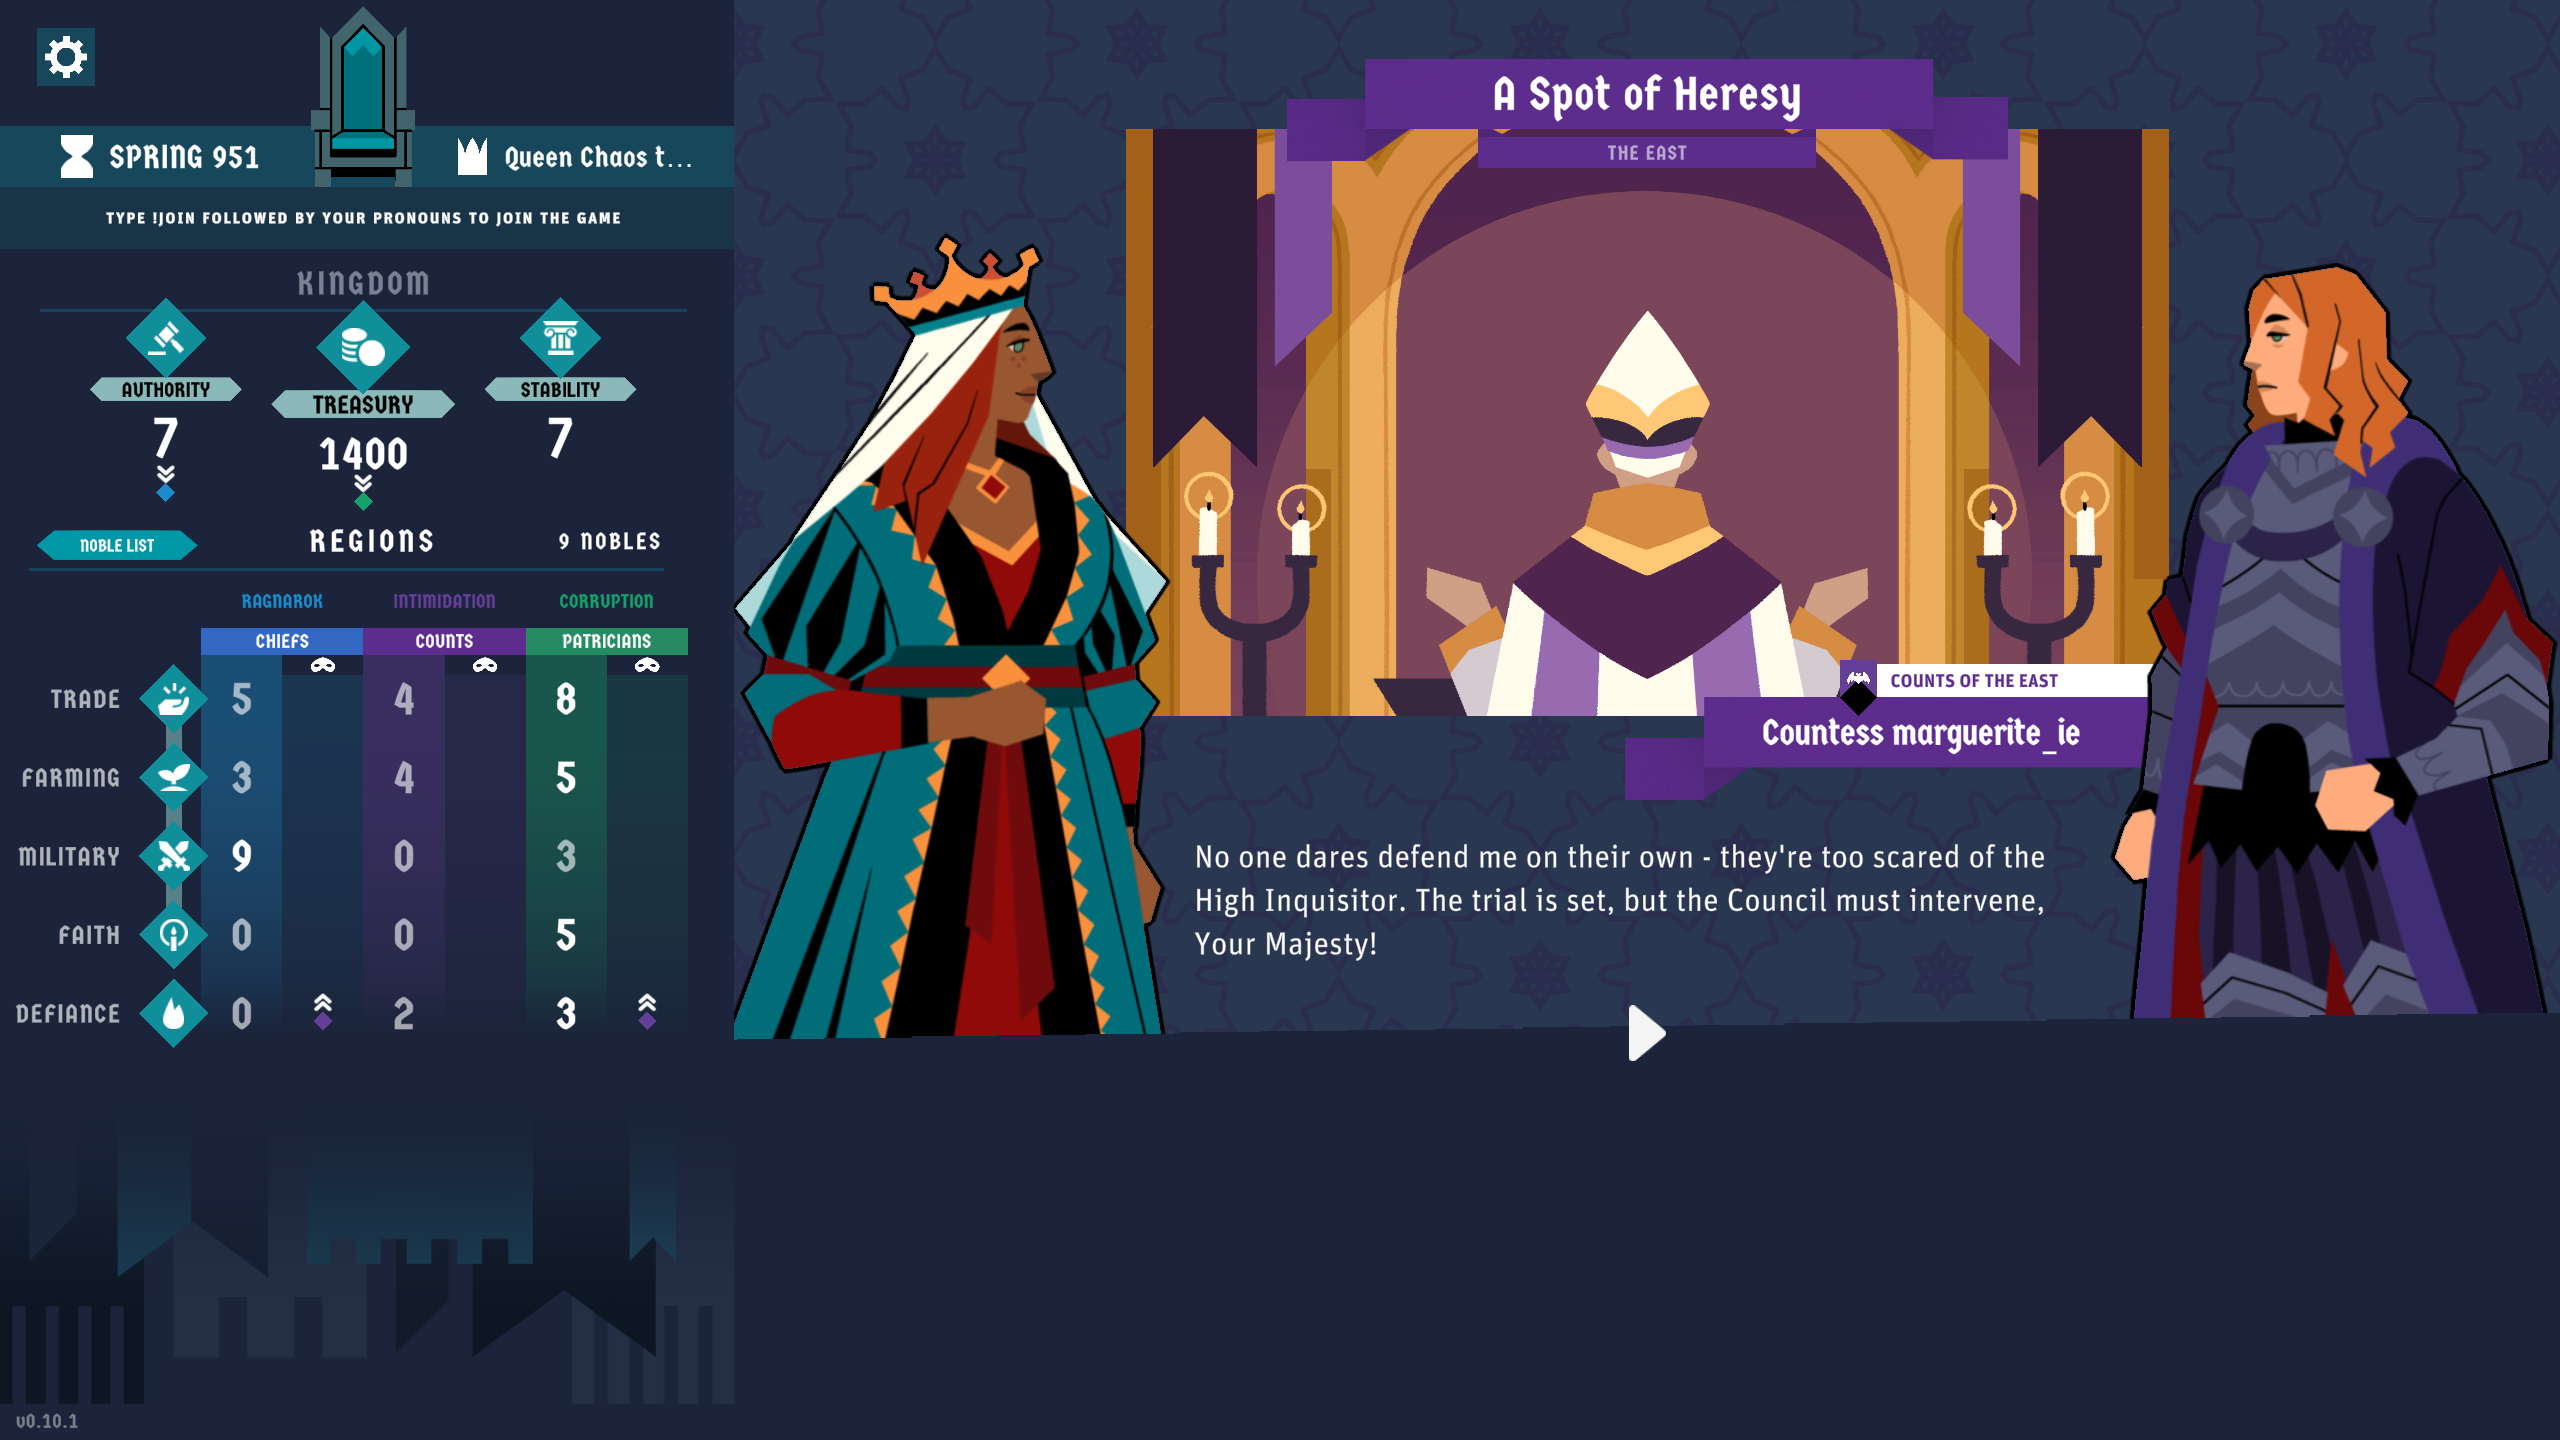 This is a standard King of the Castle screen layout, with the regions on the left as well as season name and monarch name. Then below you have the kingdom stats followed by the region stats. In the right have side of the screen you have an illustration that shows the name of the current event along with what region it currently is effecting. Then 2 characters are shown, one on the left is the monarch and the one on the right is Countess Marguerite_ie of the Counts of the East. Below the text reads - no one dares defend me on their own - theyre too scared of the high inquisitor. The trial is set, but the council must intervene, your majesty.